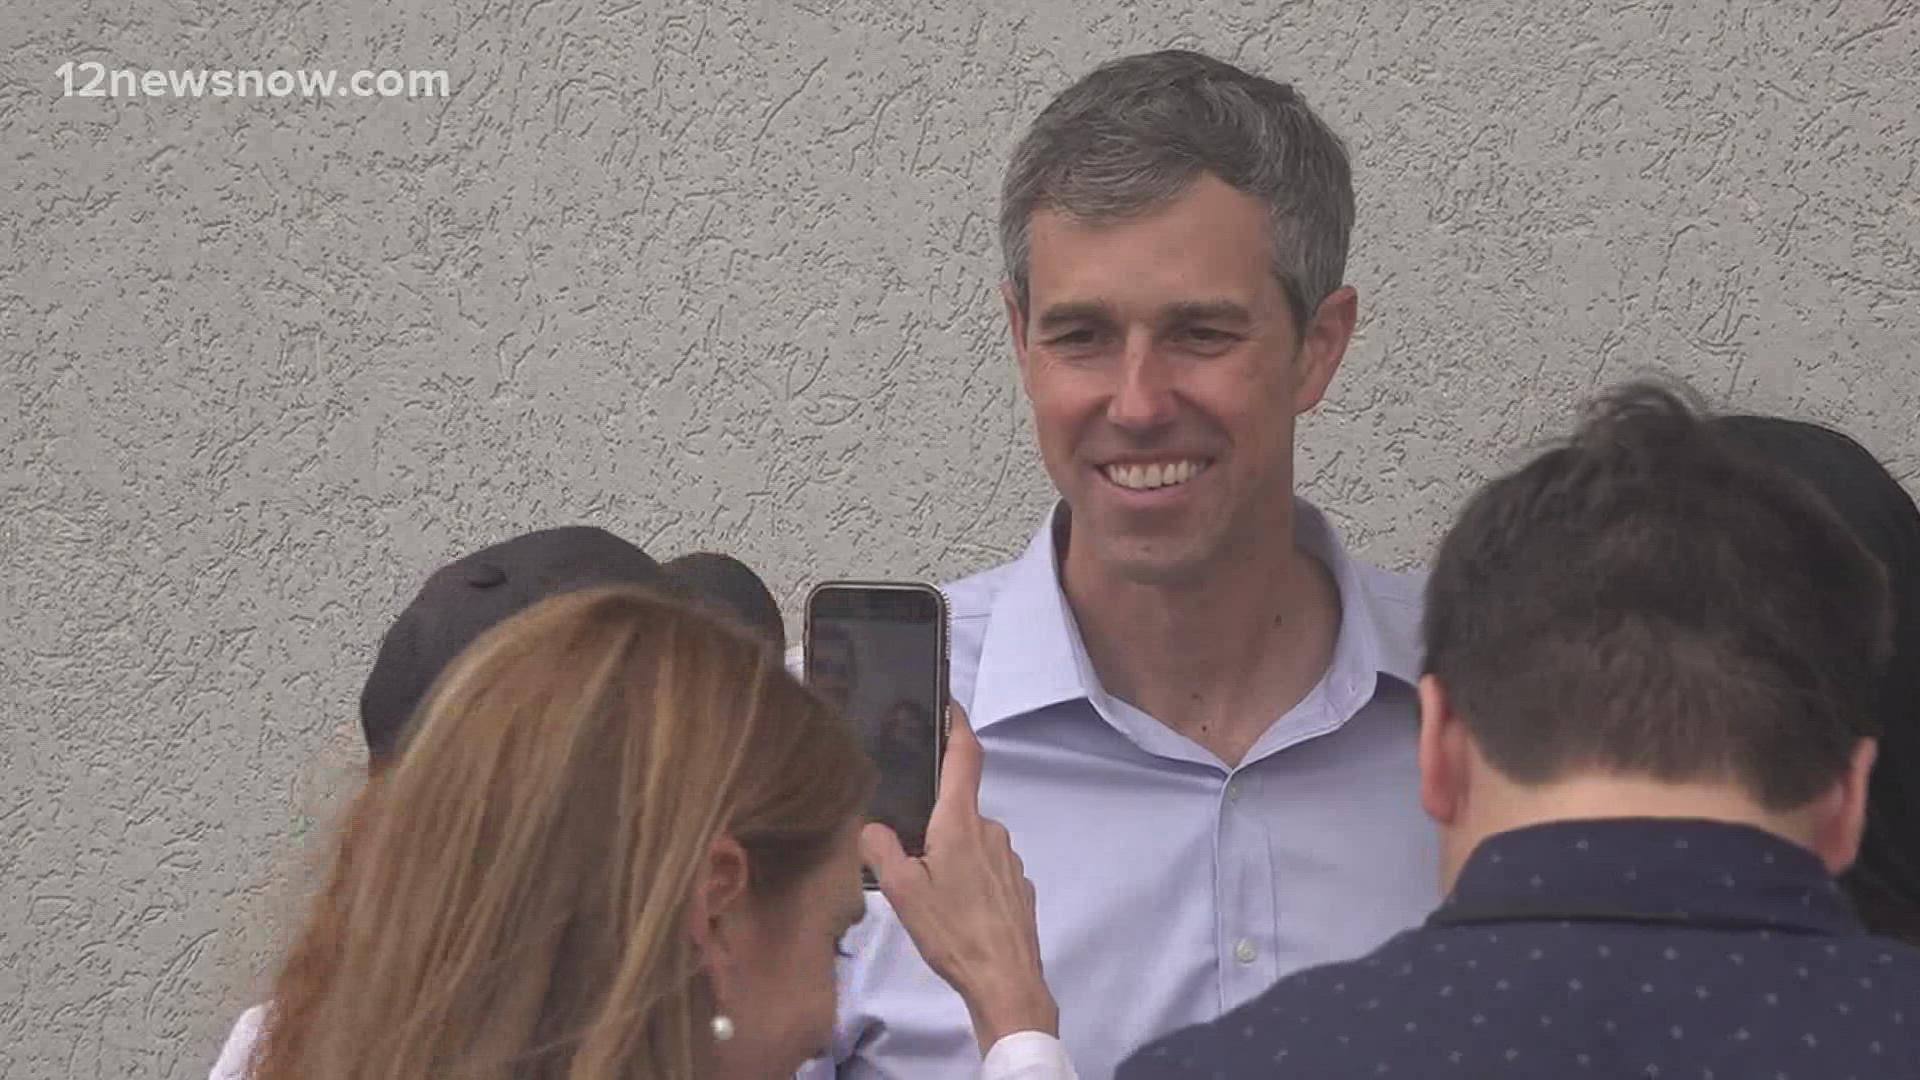 O’Rourke made a stop in Port Arthur on Monday for a town hall. The event was held at the Museum of the Gulf Coast.